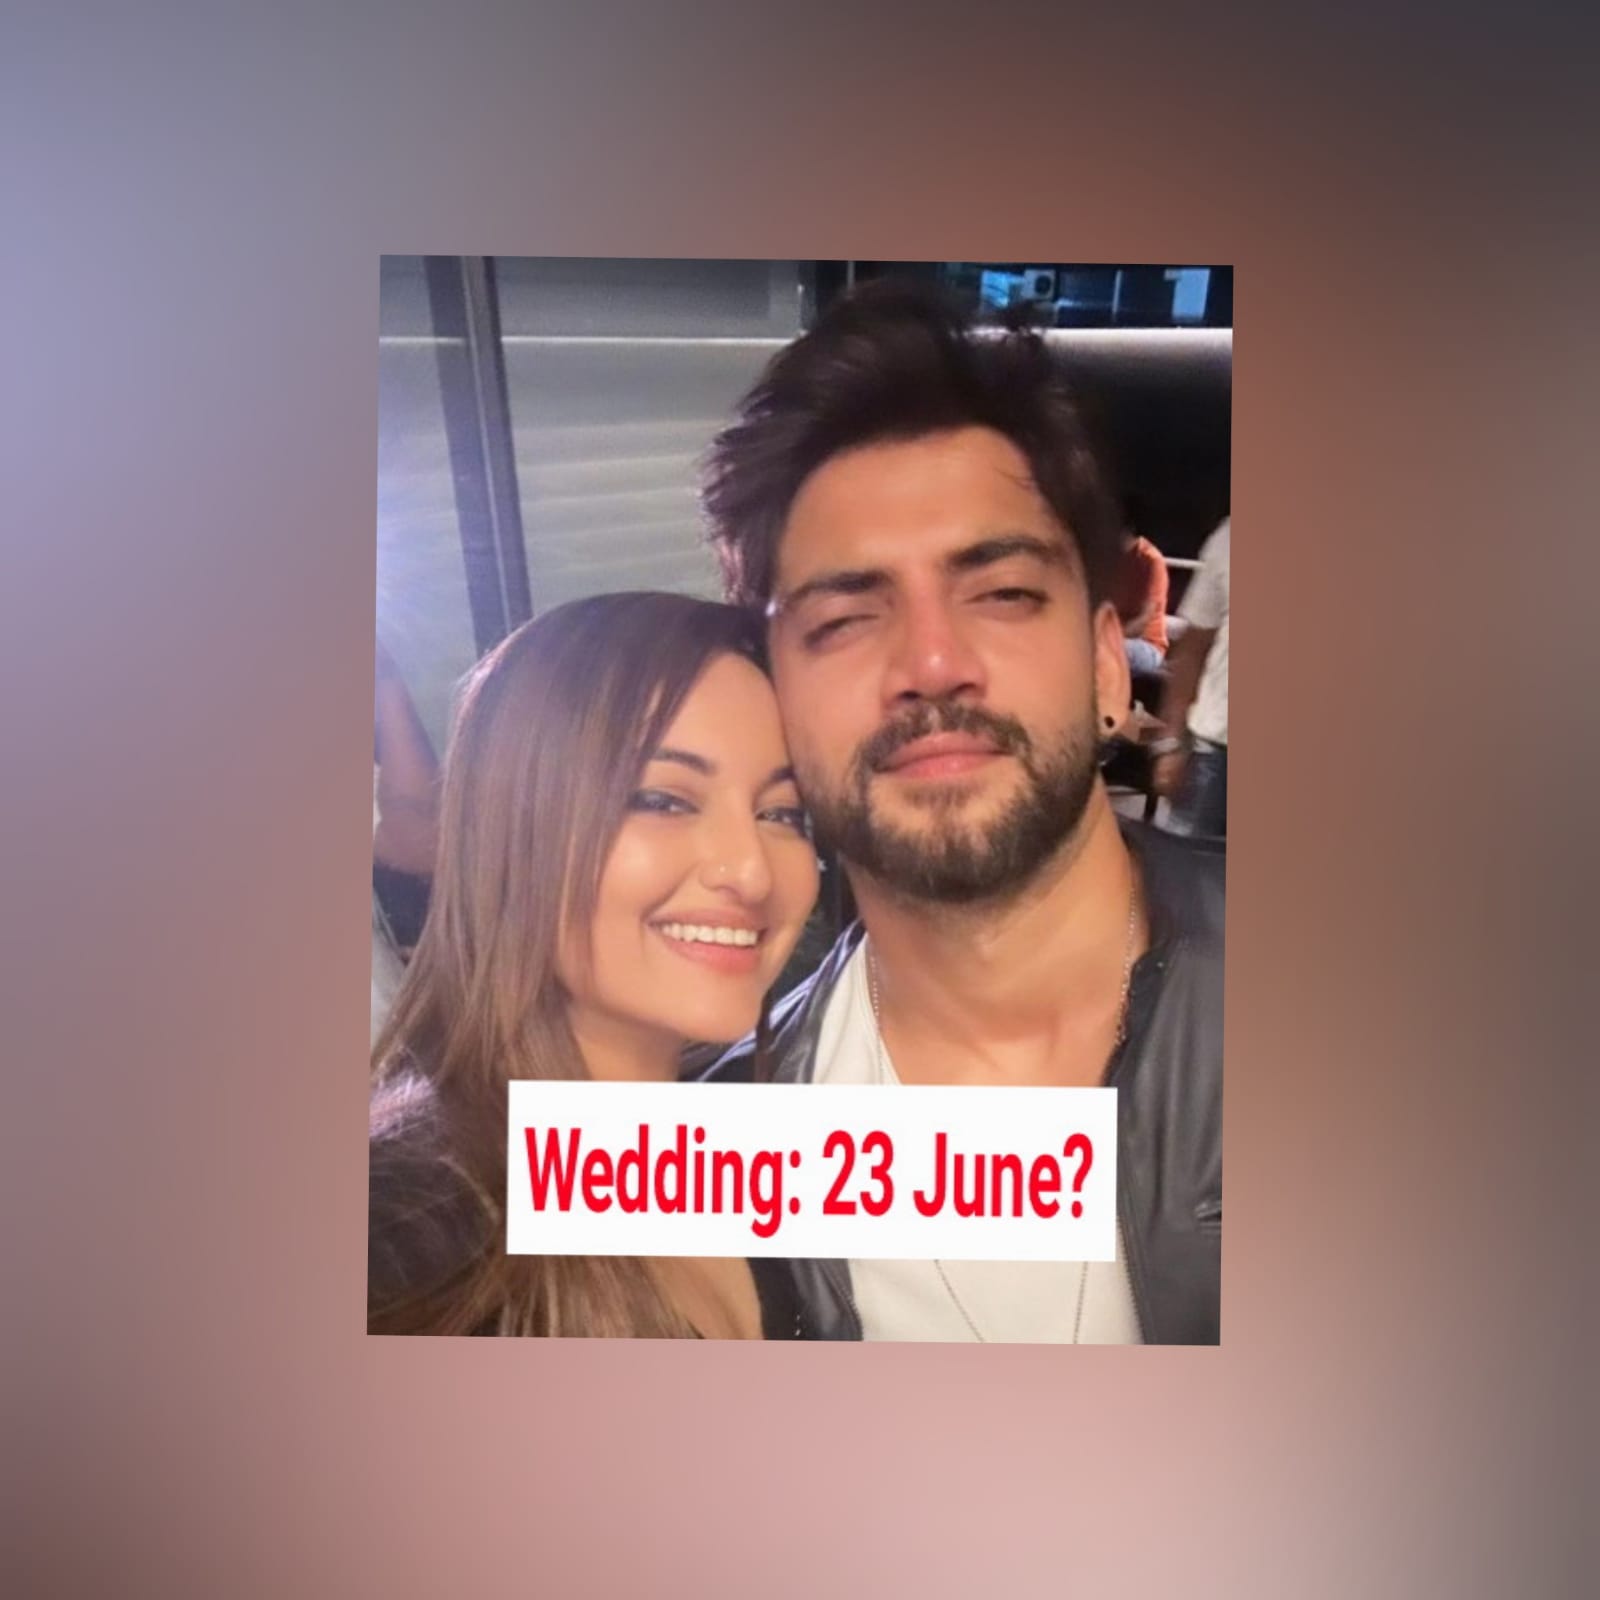 Sonakshi Sinha And Zaheer Iqbal To Get Married On 23 June!